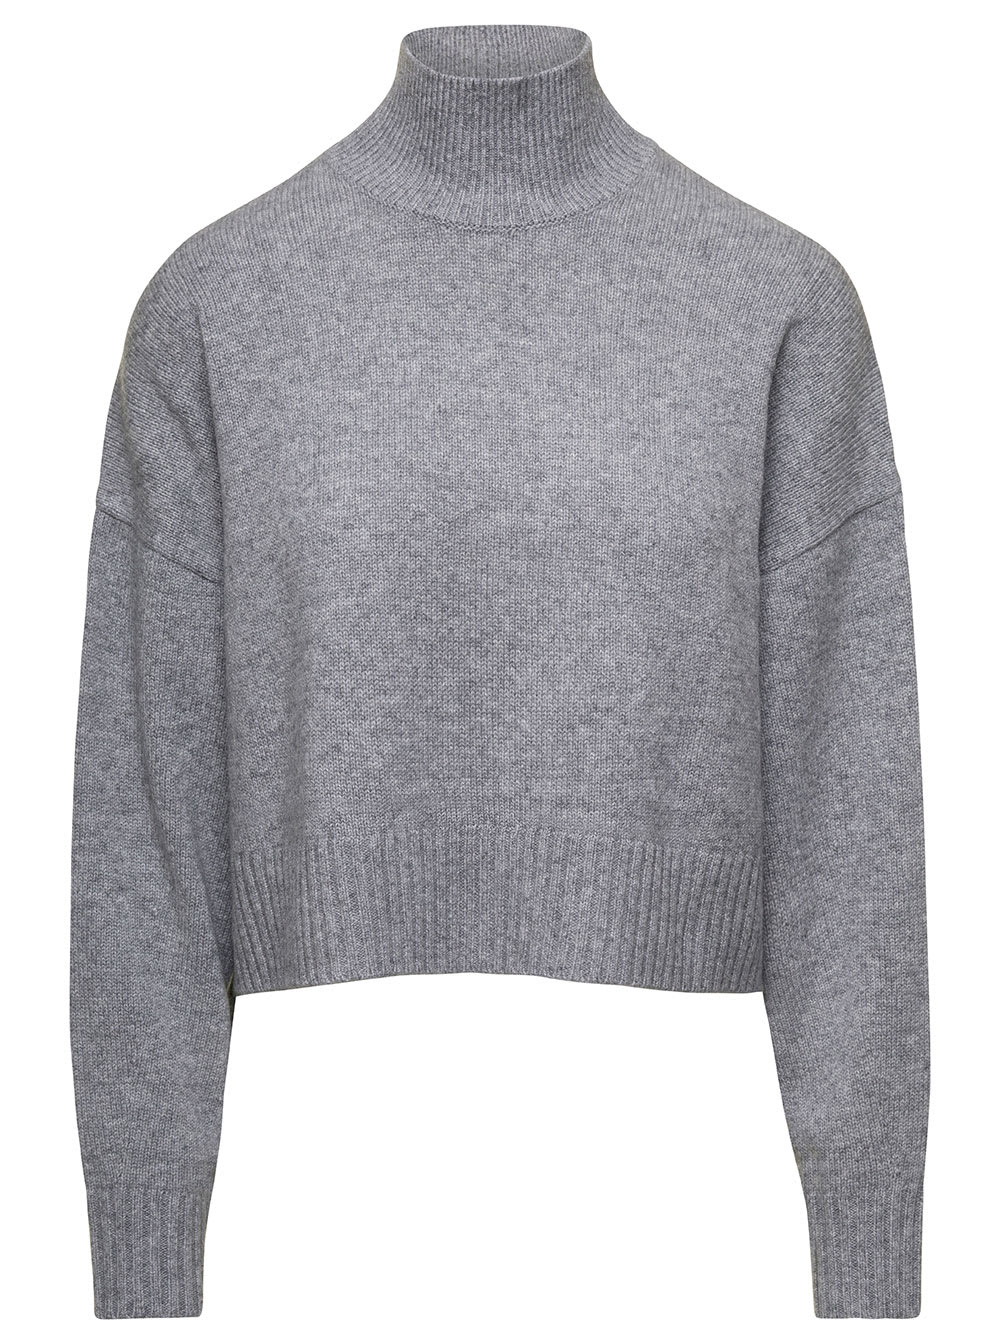 THEORY HIGHE NECK CASHMERE PULL